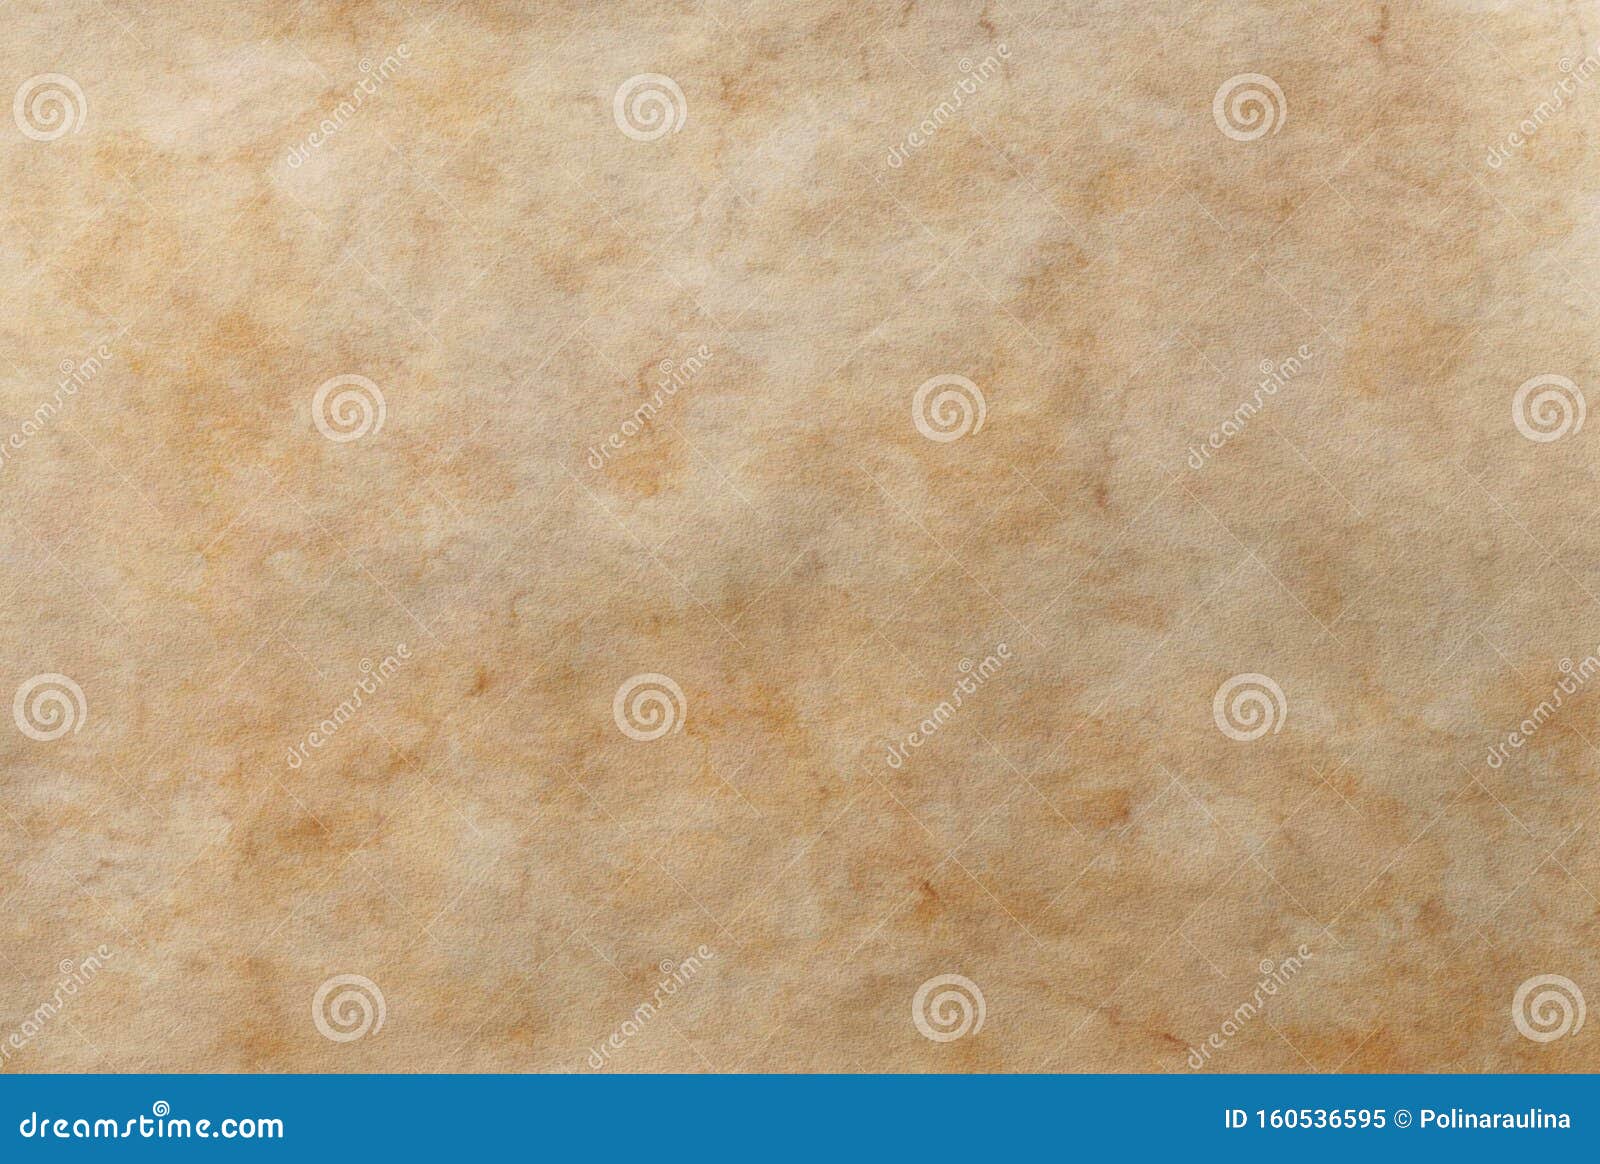 Blank Old Parchment Paper Stock Image Image Of Corners 160536595